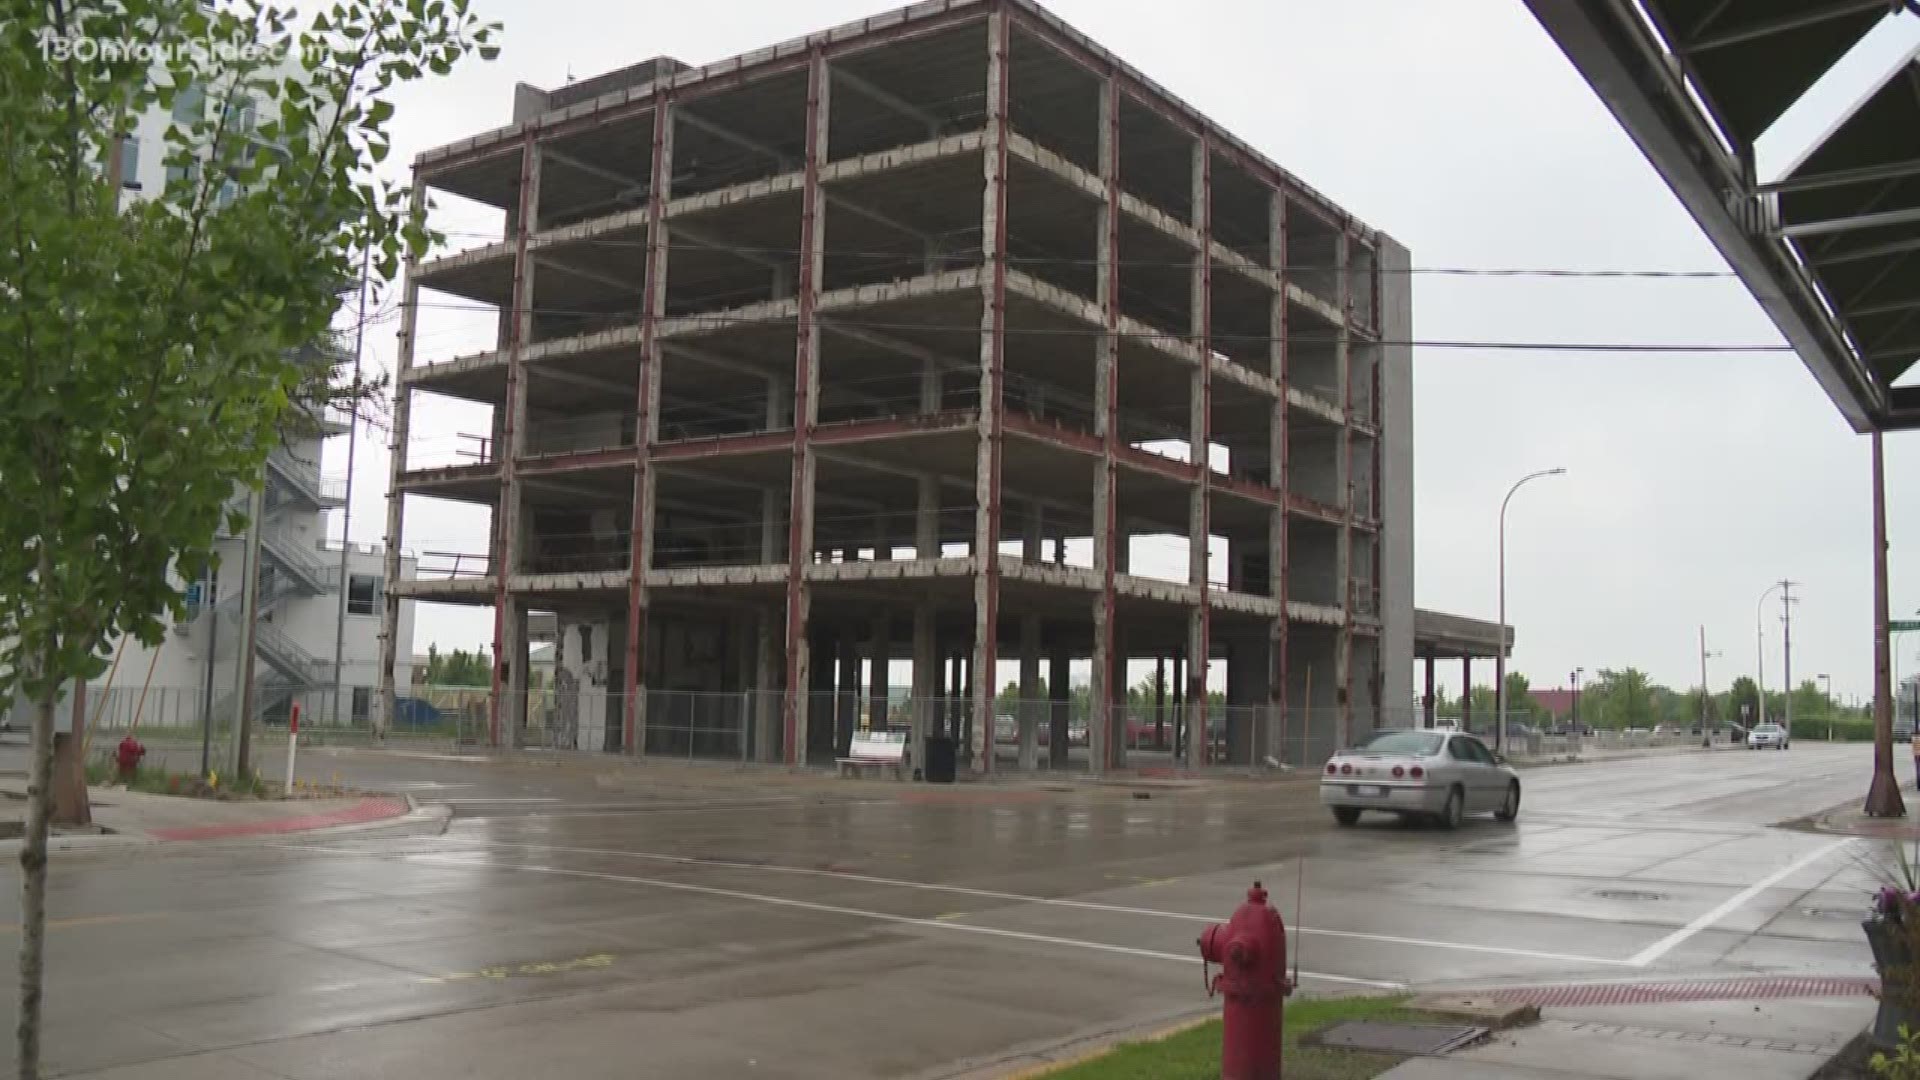 City leaders in Muskegon believe the steel frame to the former Ameribank building still holds great potential for redevelopment in the city's downtown.